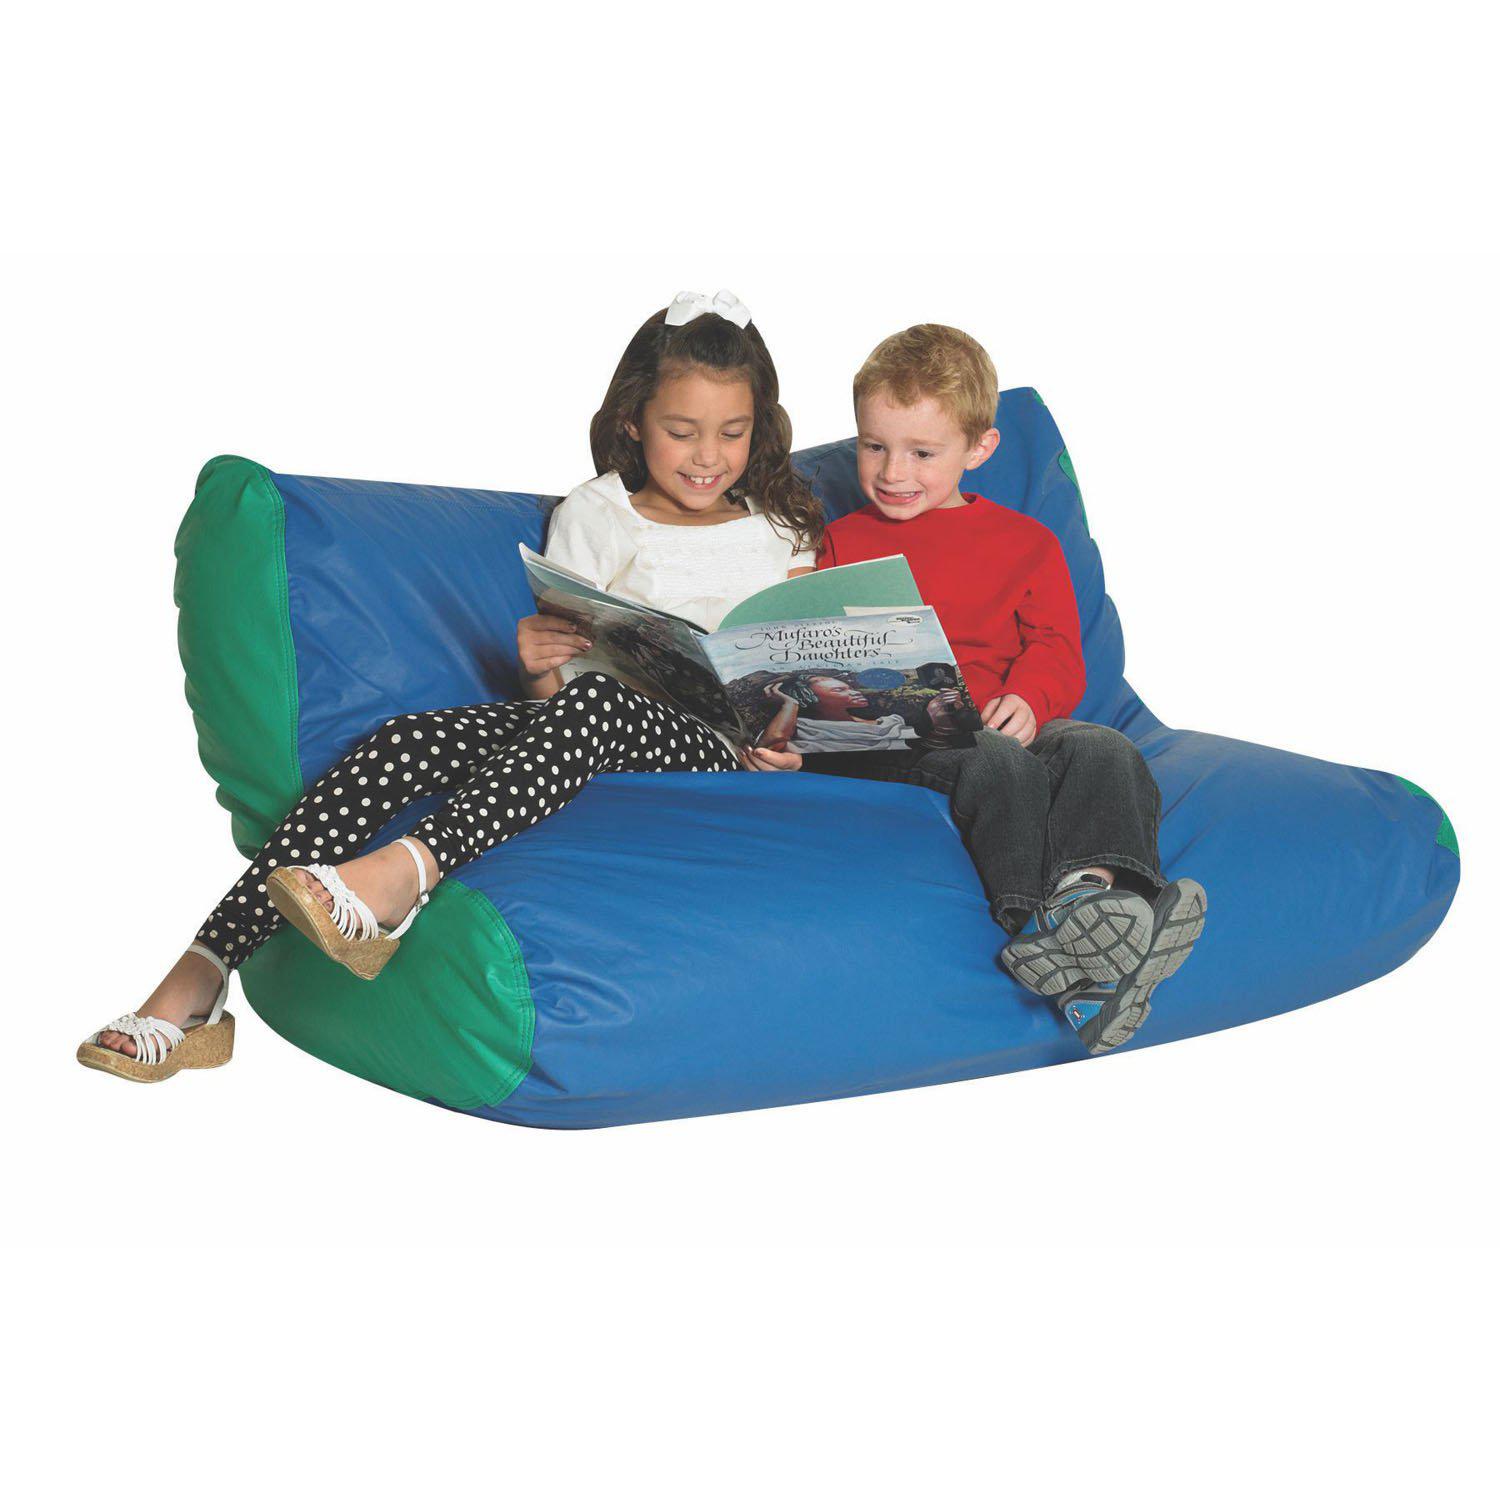 School Age Double High Back Lounger, Blue with Green Sides